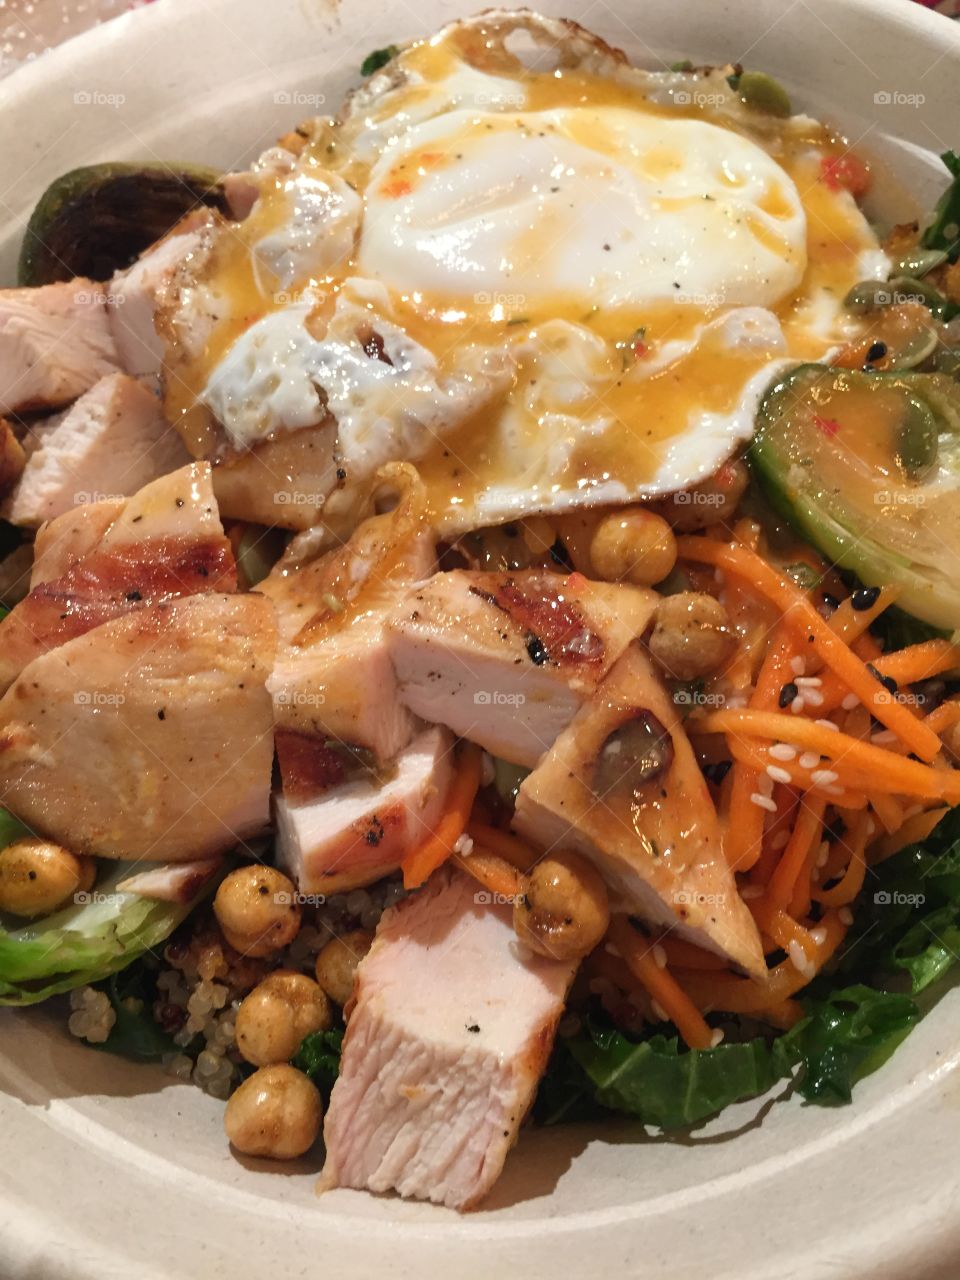 Kale salad with chicken and quinoa and carrots and other good veggies 